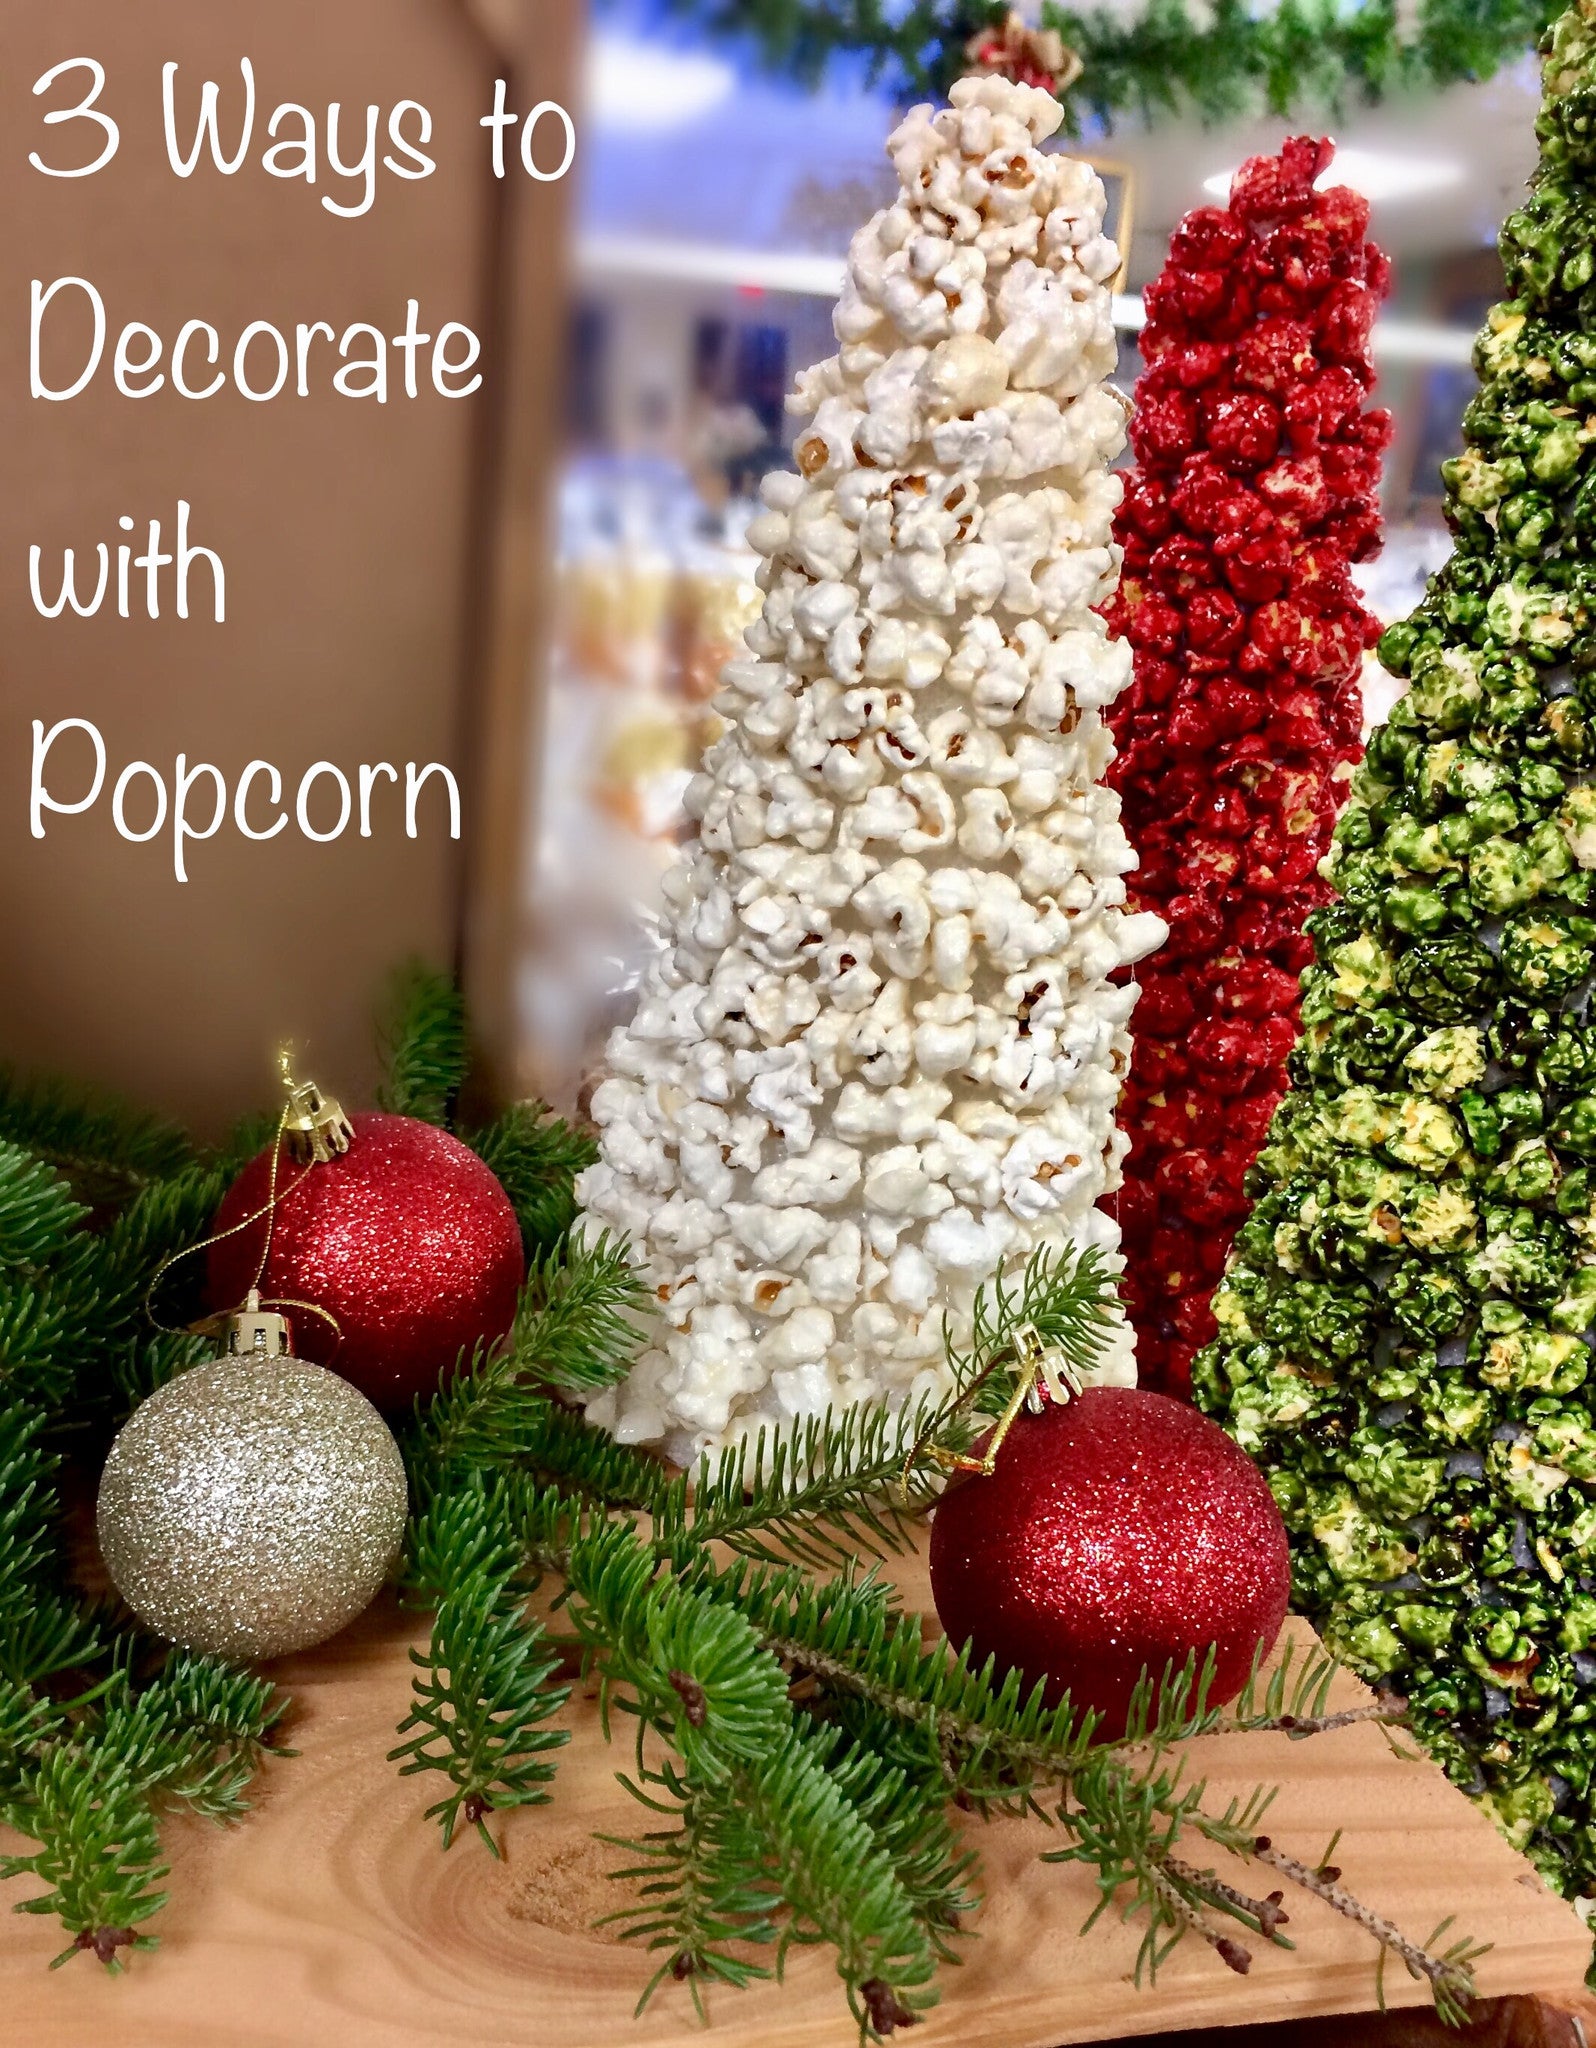 Our 3 Favorite Ways to Decorate with Popcorn – Grand Rapids Popcorn